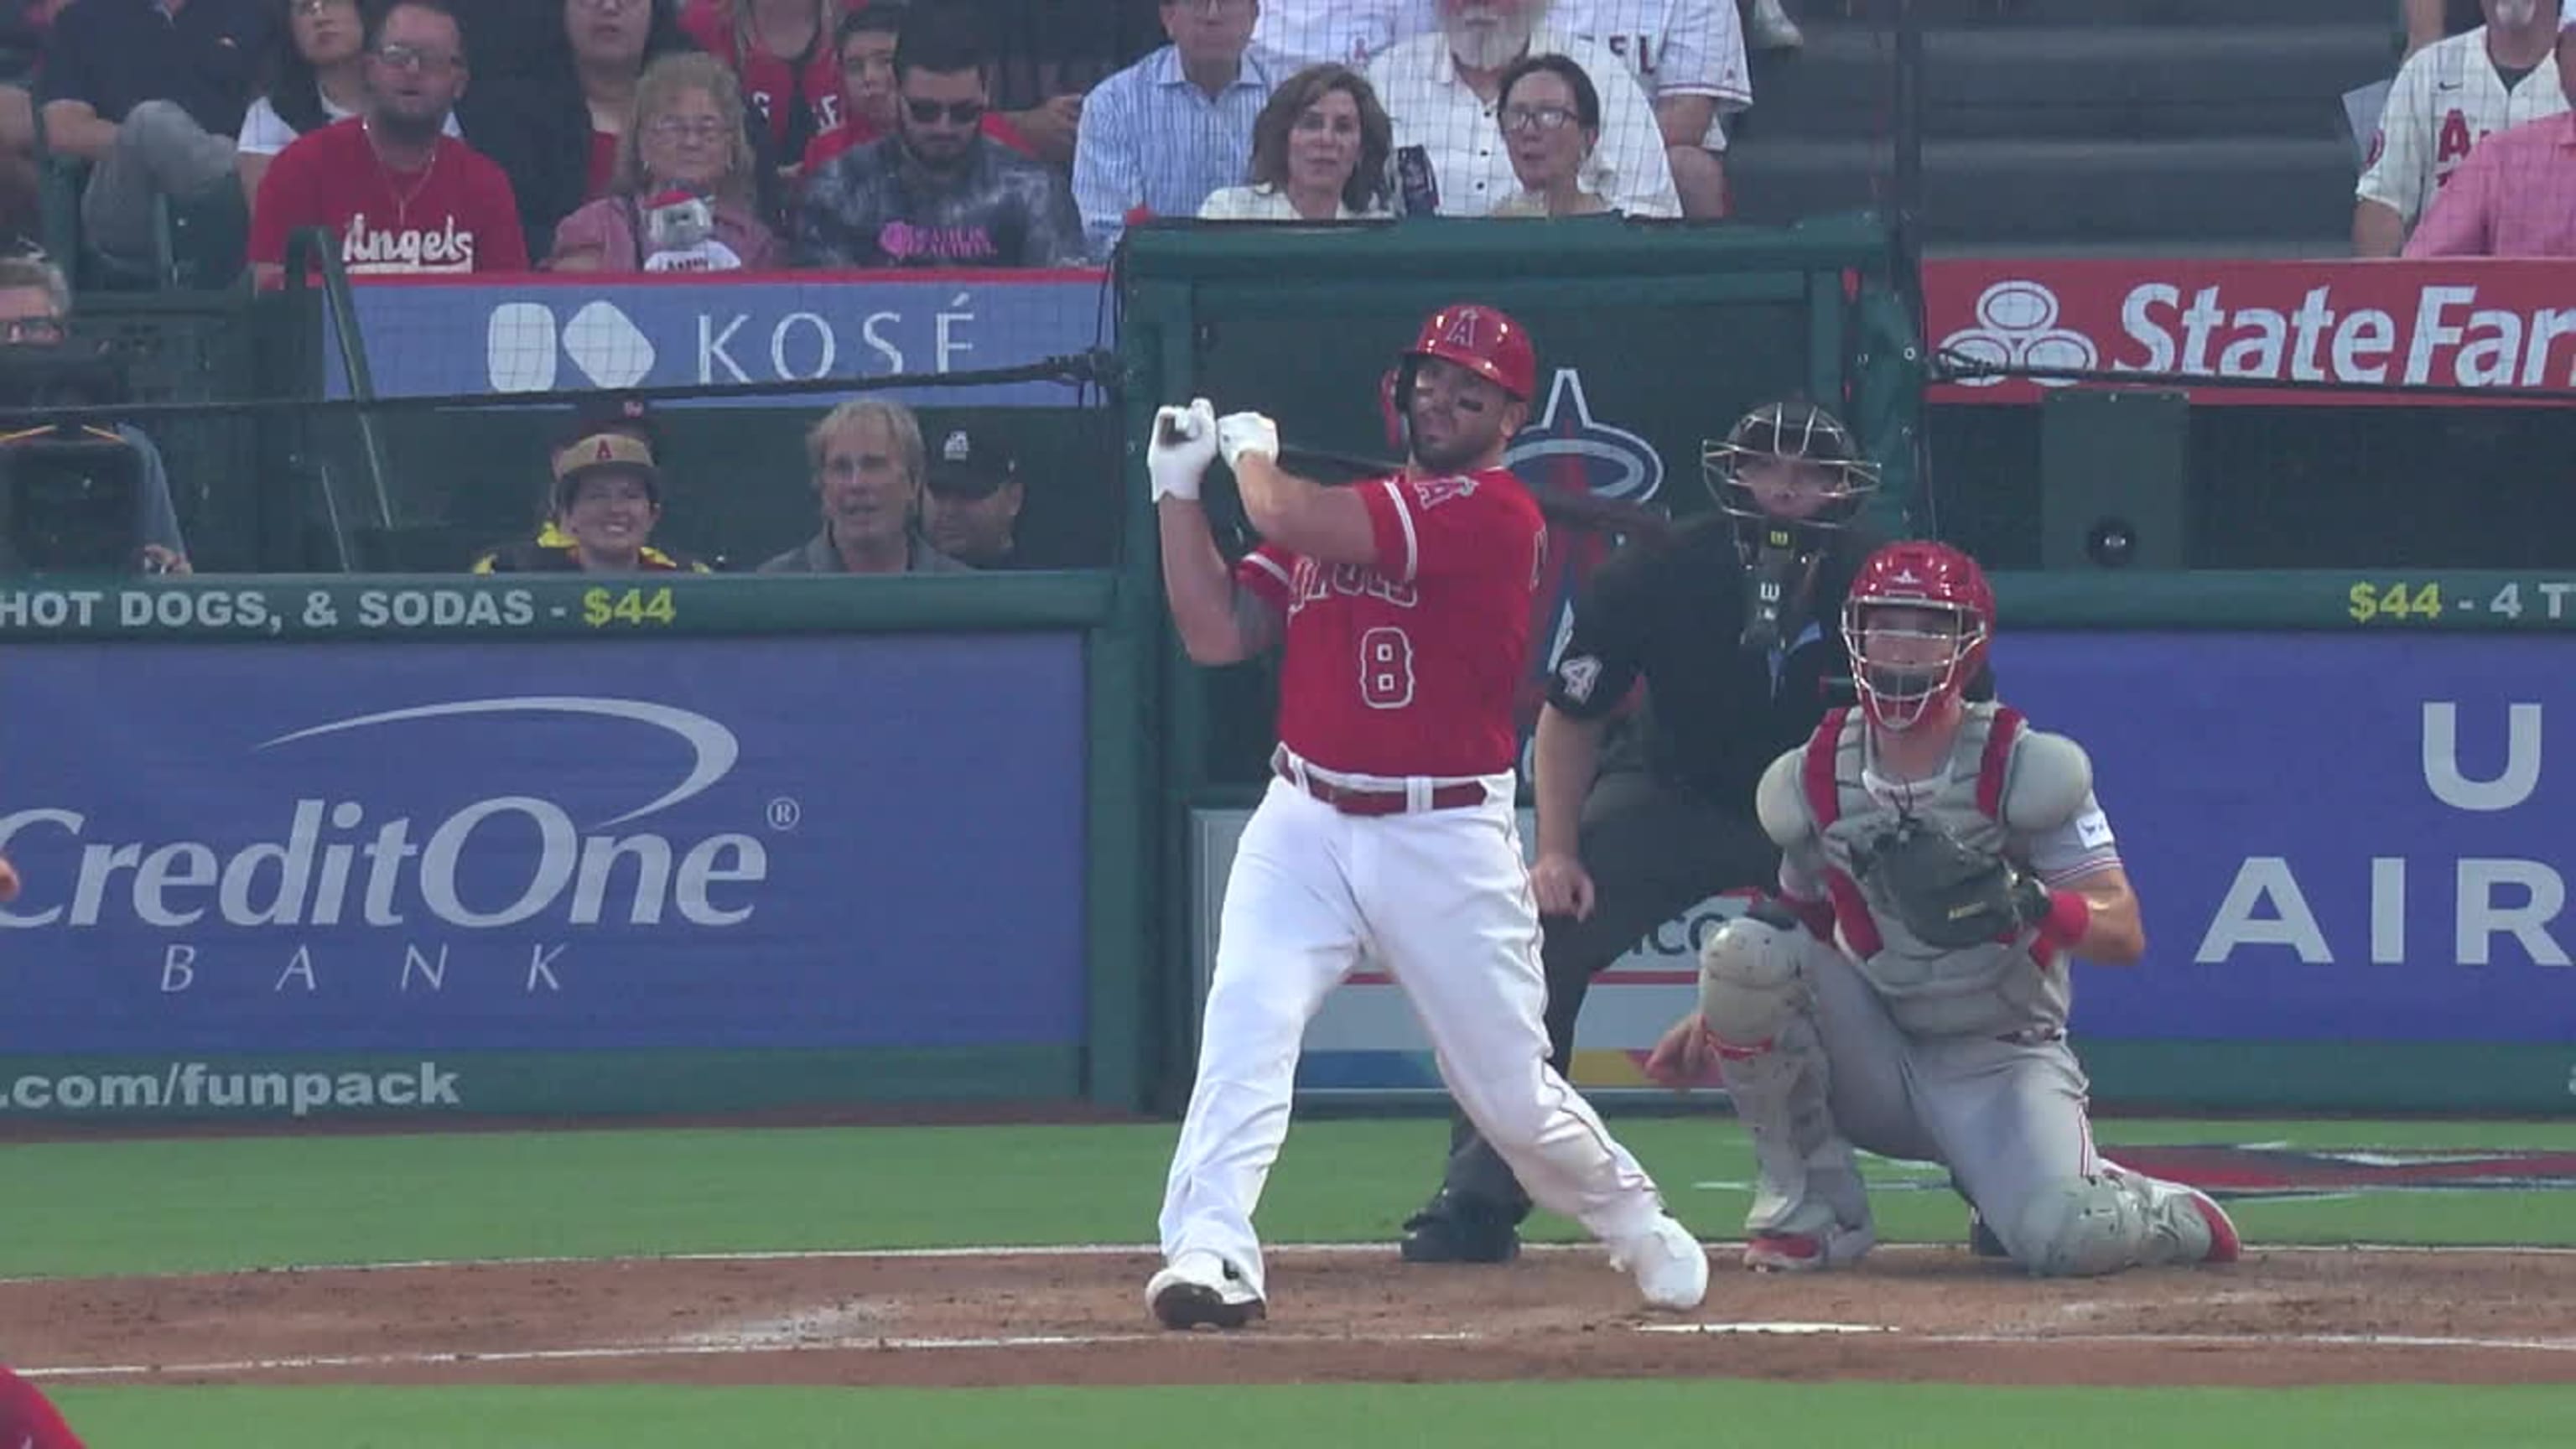 Mike Trout is on FIRE! Has crushed the ball since returning from injury! 